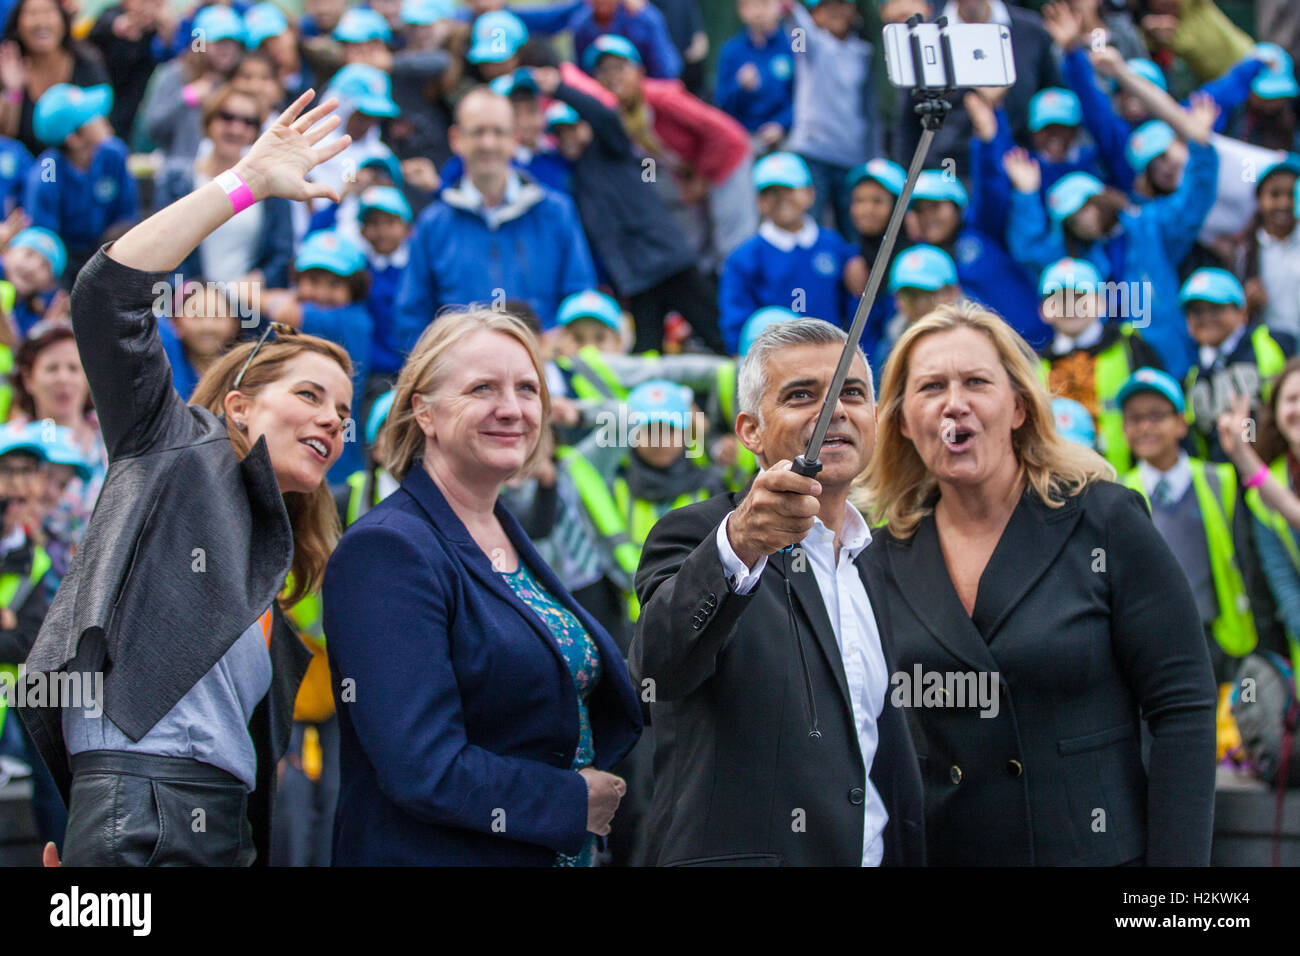 London, UK. 29th September, 2016. The Mayor of London, Sadiq Khan, takes a selfie with Darcey Bussell, Joanne McCartney (Deputy Mayor for Education), Yelena Baturina (founder of the Be Open Foundation) and hundreds of schoolchildren after launching the new London Curriculum for primary schools at the London Curriculum Festival at the Scoop. © Mark Kerrison/Alamy Live News Credit:  Mark Kerrison/Alamy Live News Stock Photo